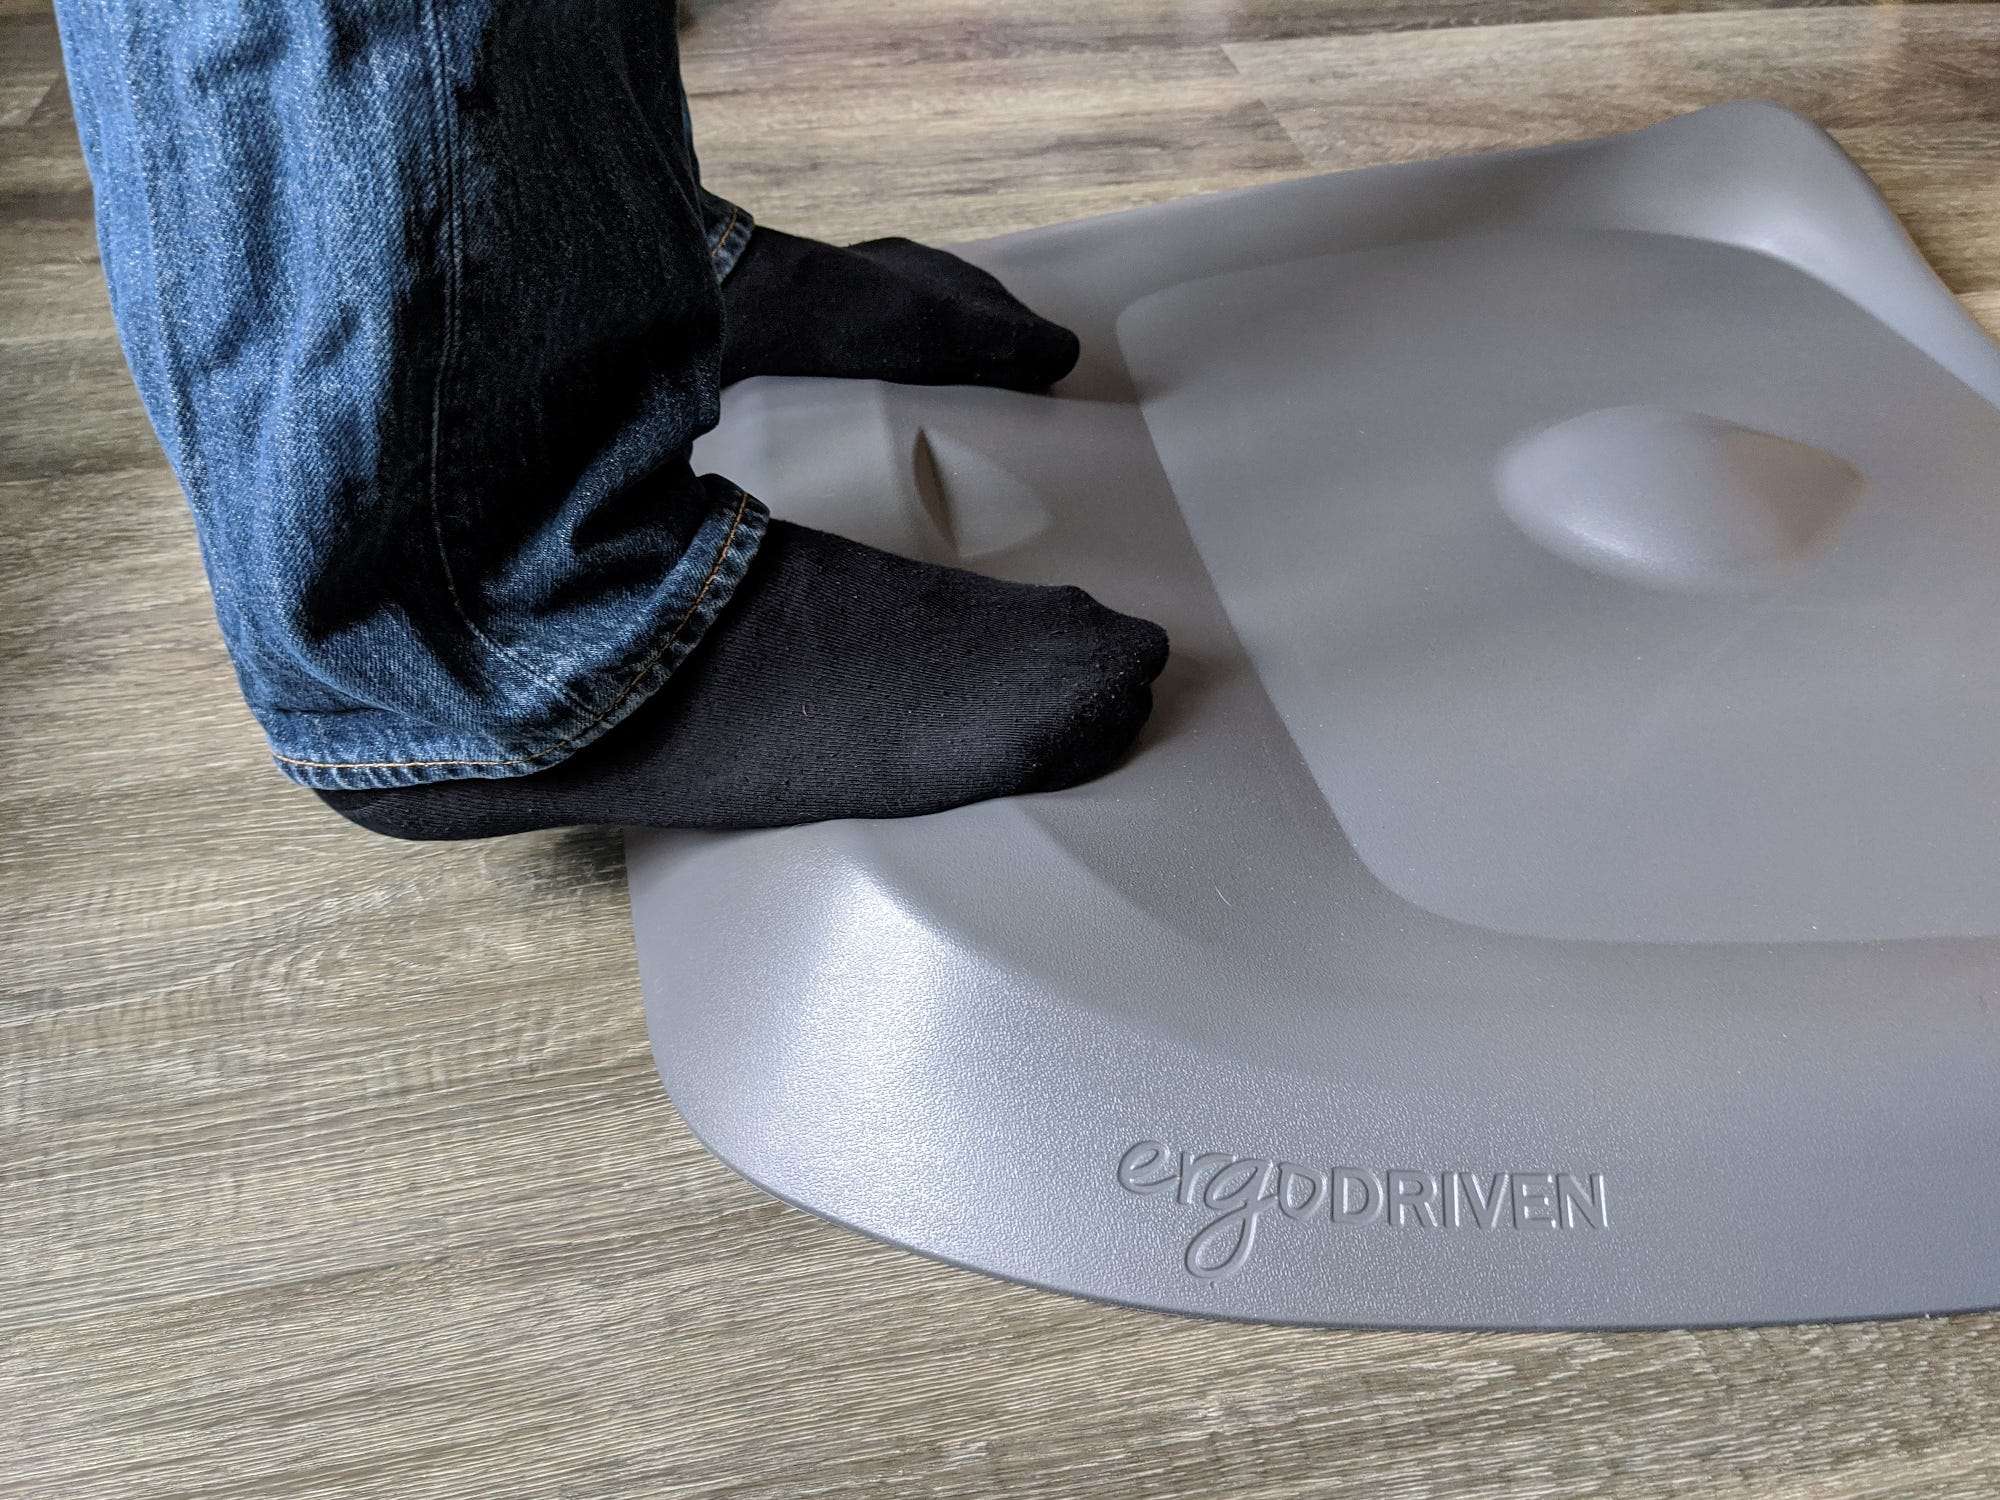 The Sky Solutions Anti-Fatigue Mat Alleviates Back and Foot Pain